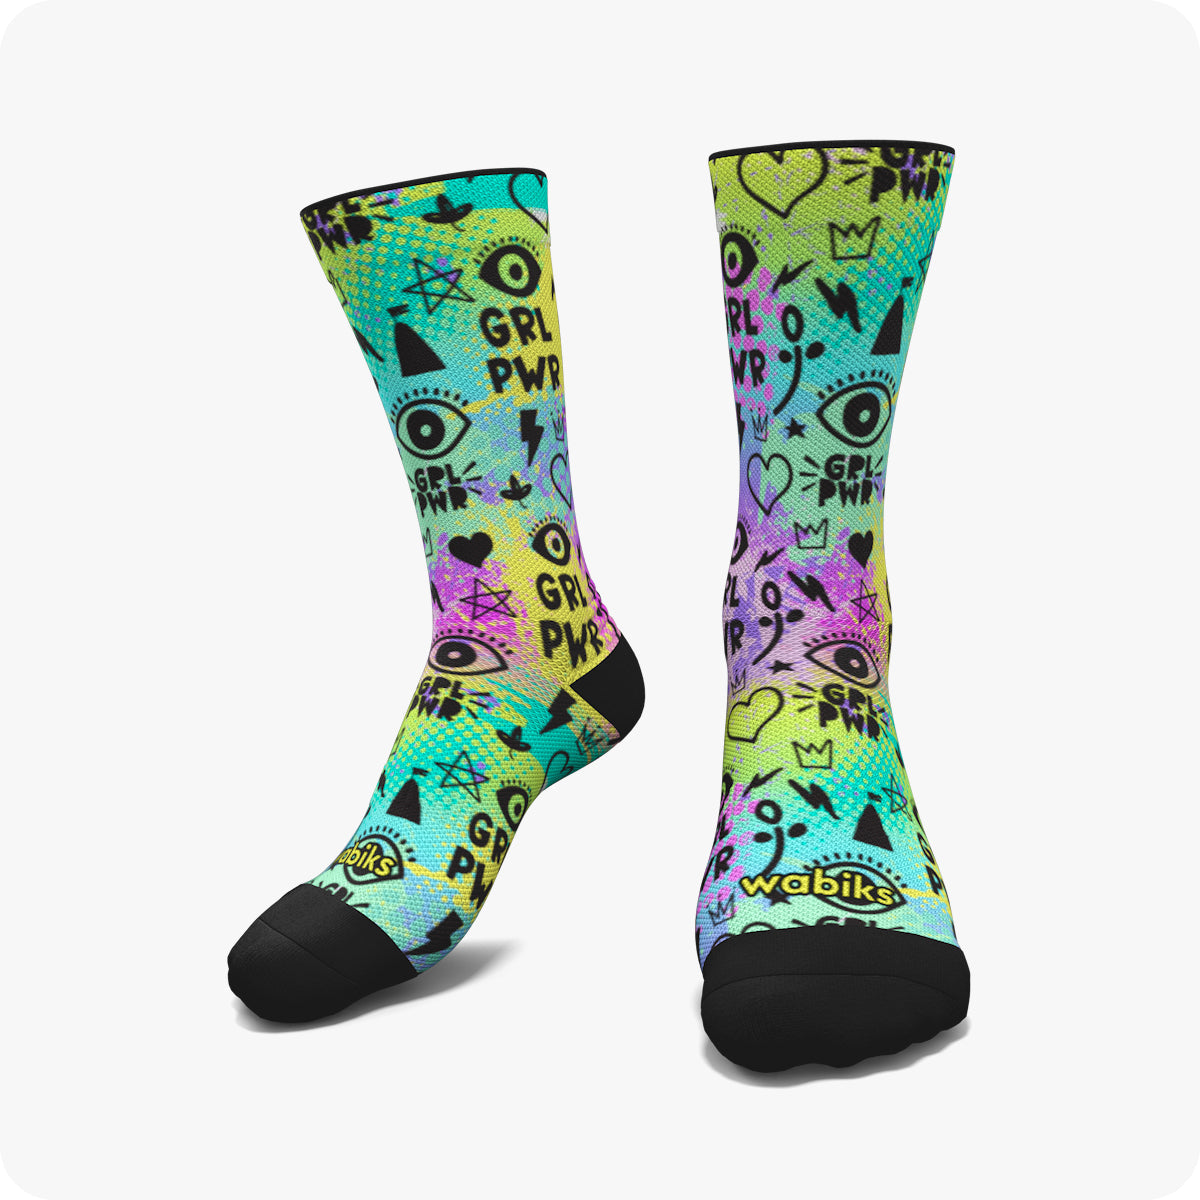 GIRL POWER - Sports Socks With Message